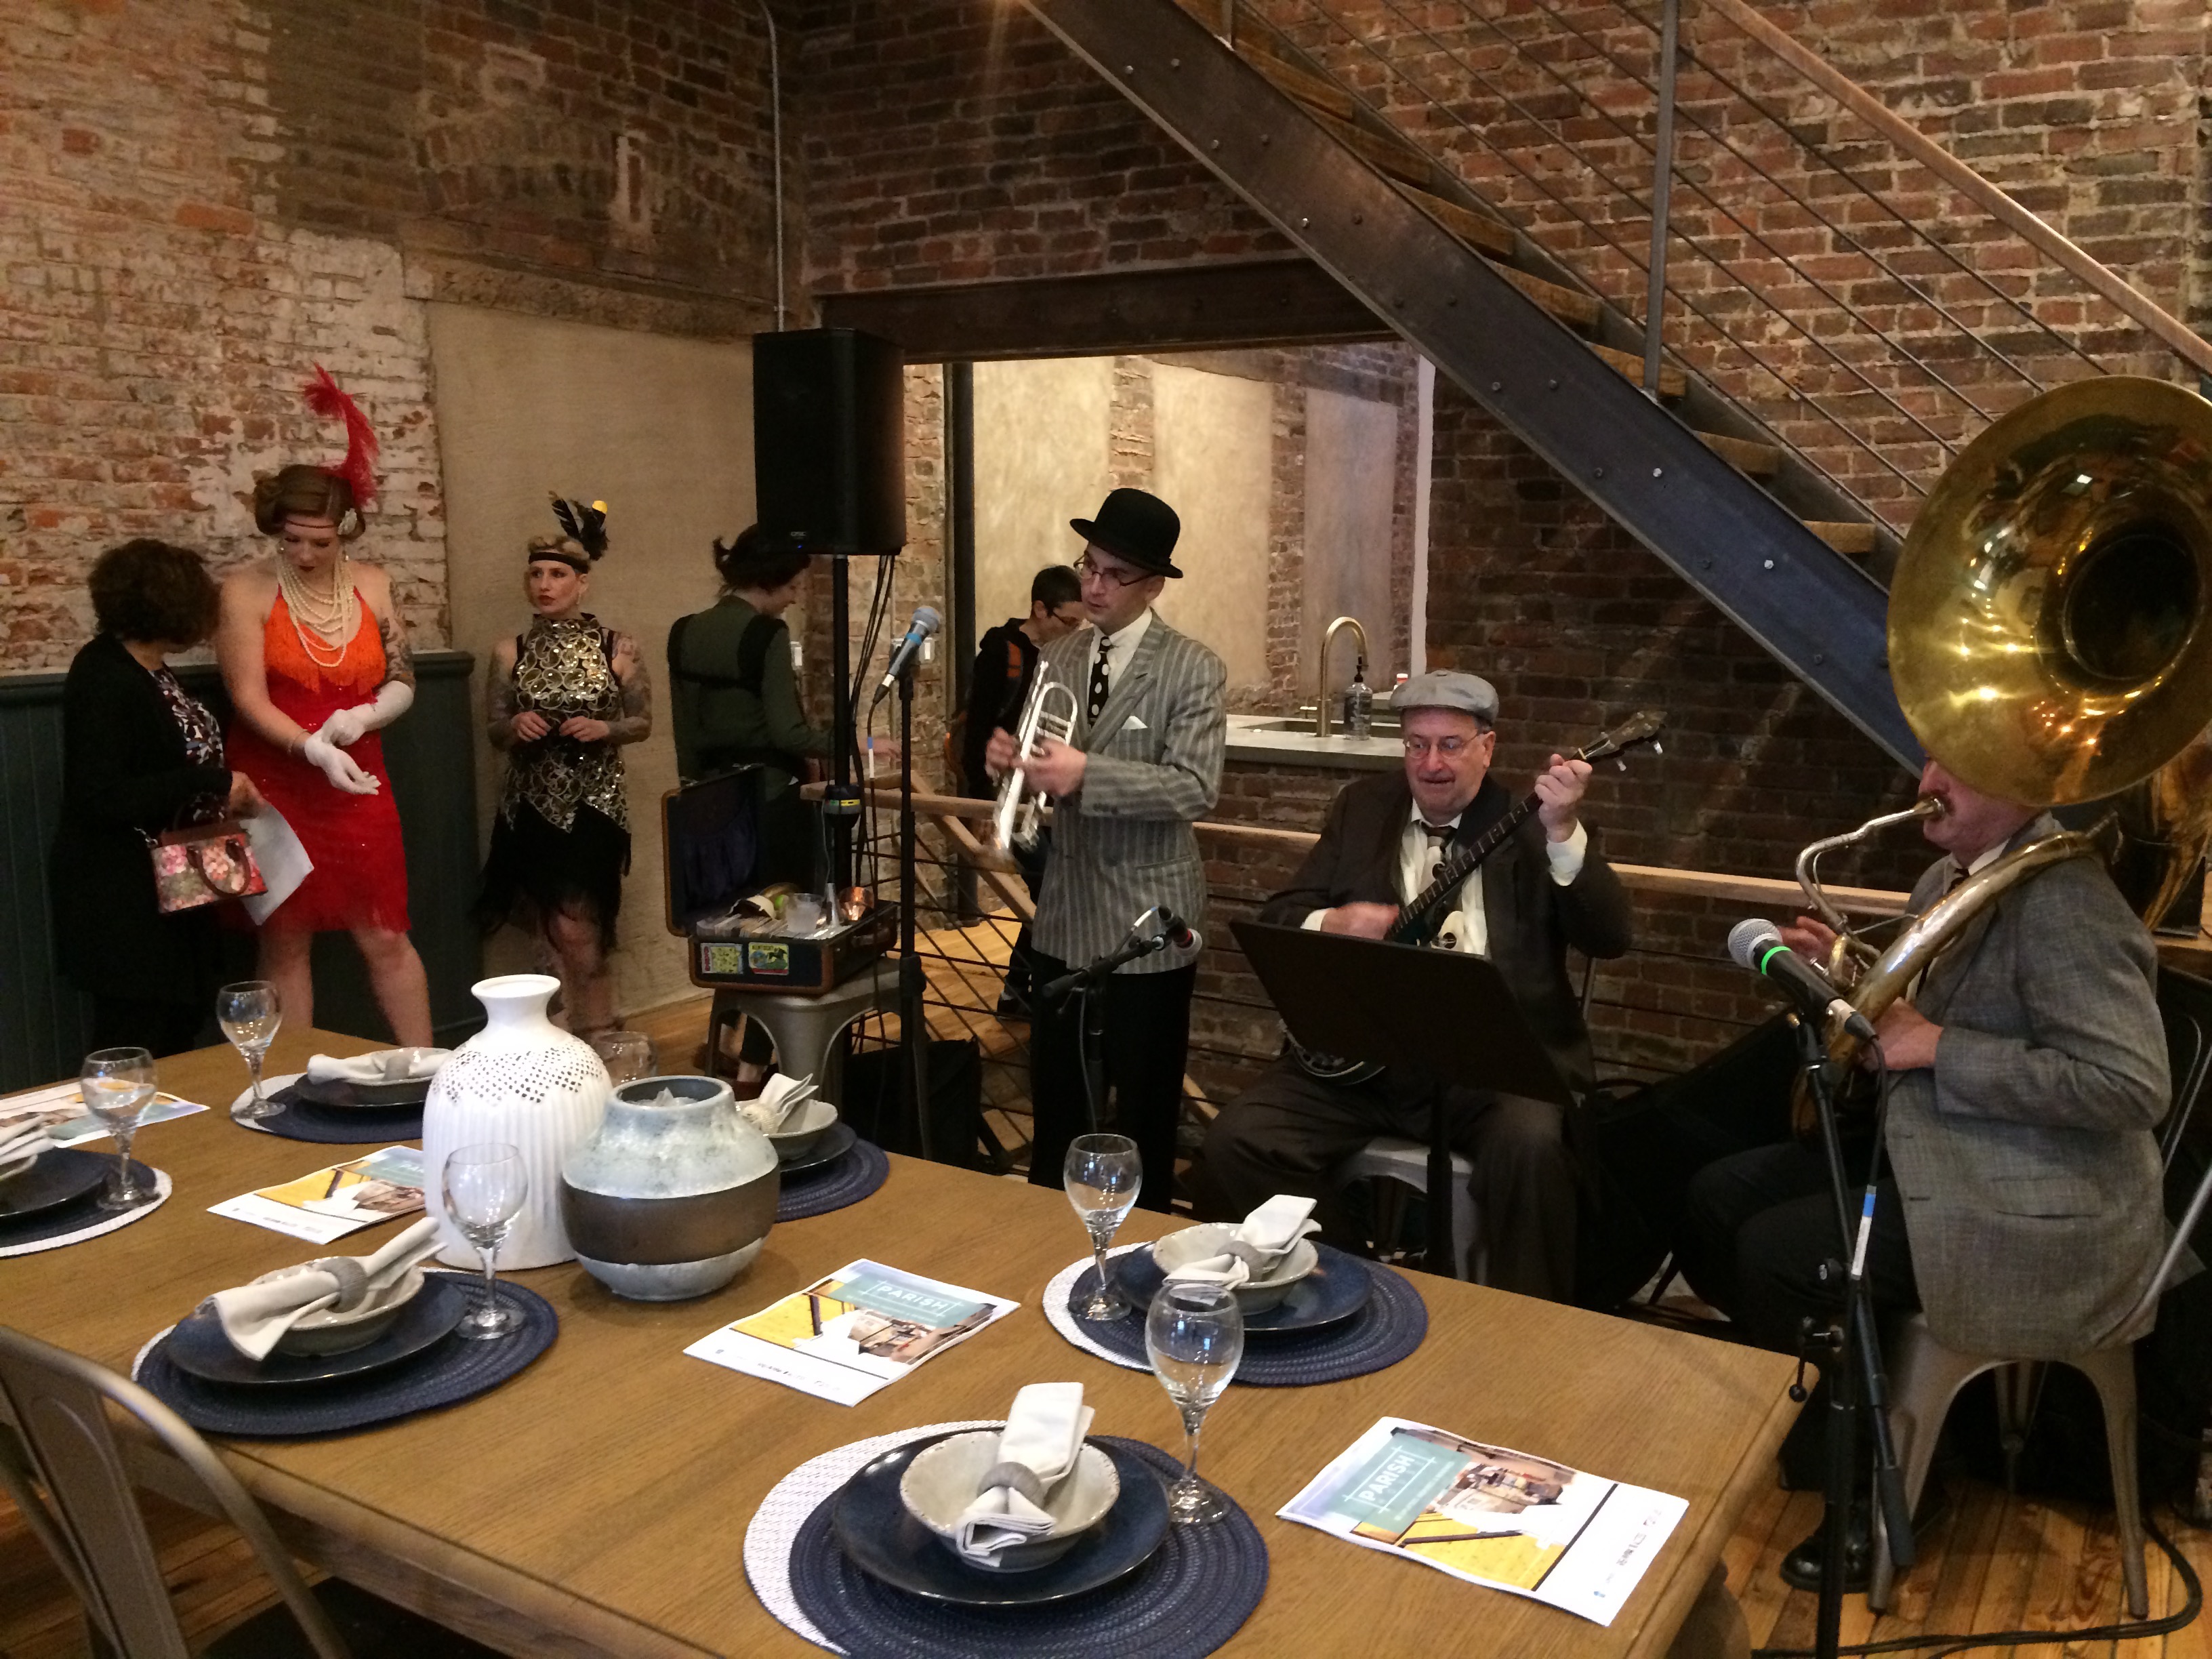 Drew Nugent and his band play while the Peek-A-Book Revue gets ready to start dancing the Charleston at a realtor's open house in East Kensington.